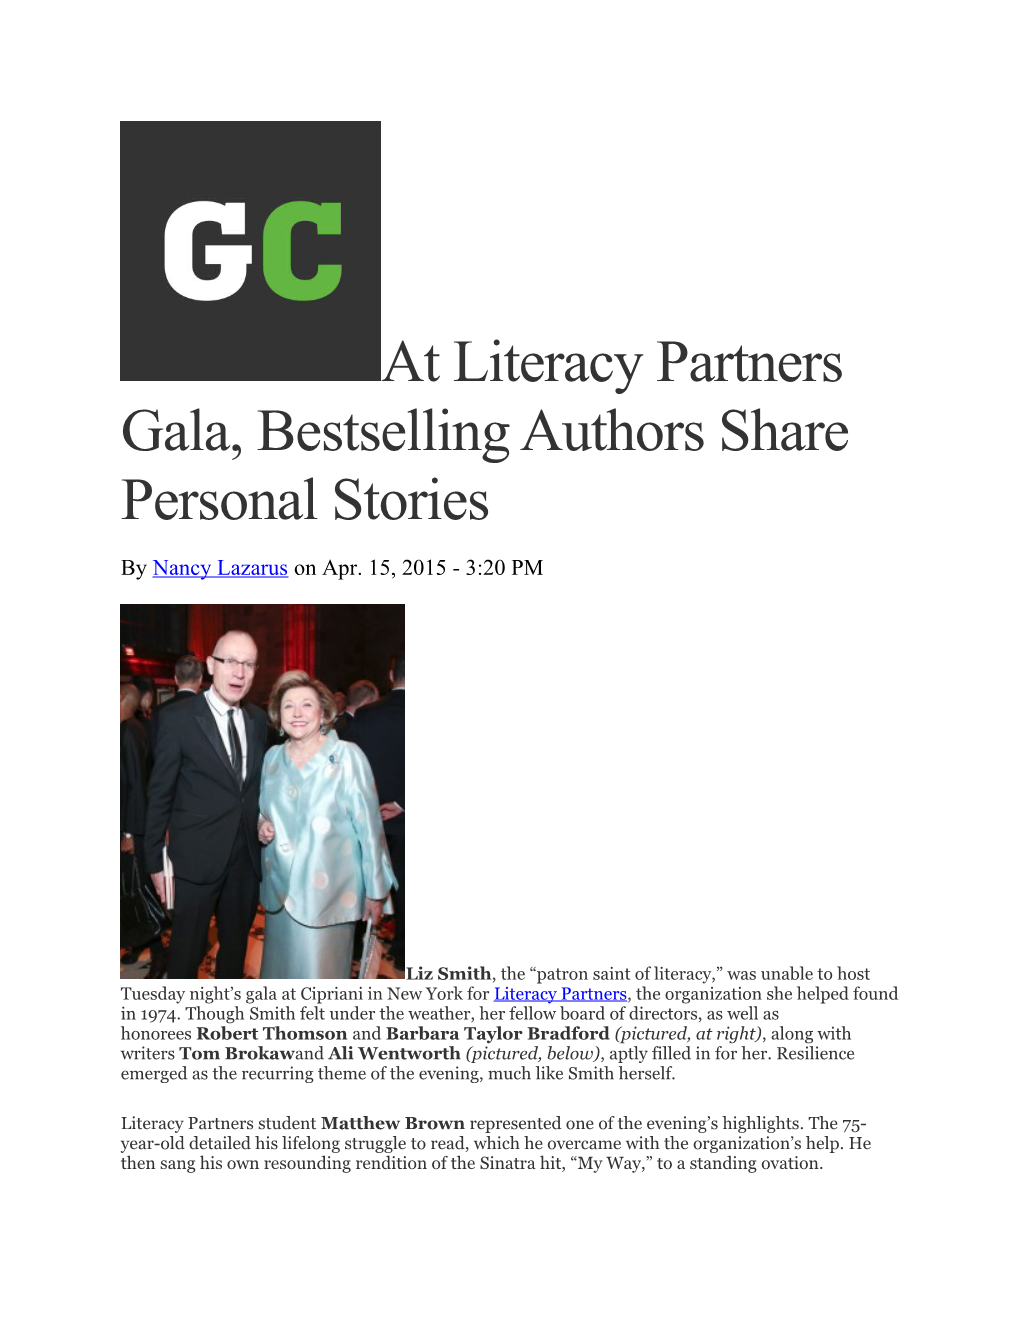 At Literacy Partners Gala, Bestselling Authors Share Personal Stories